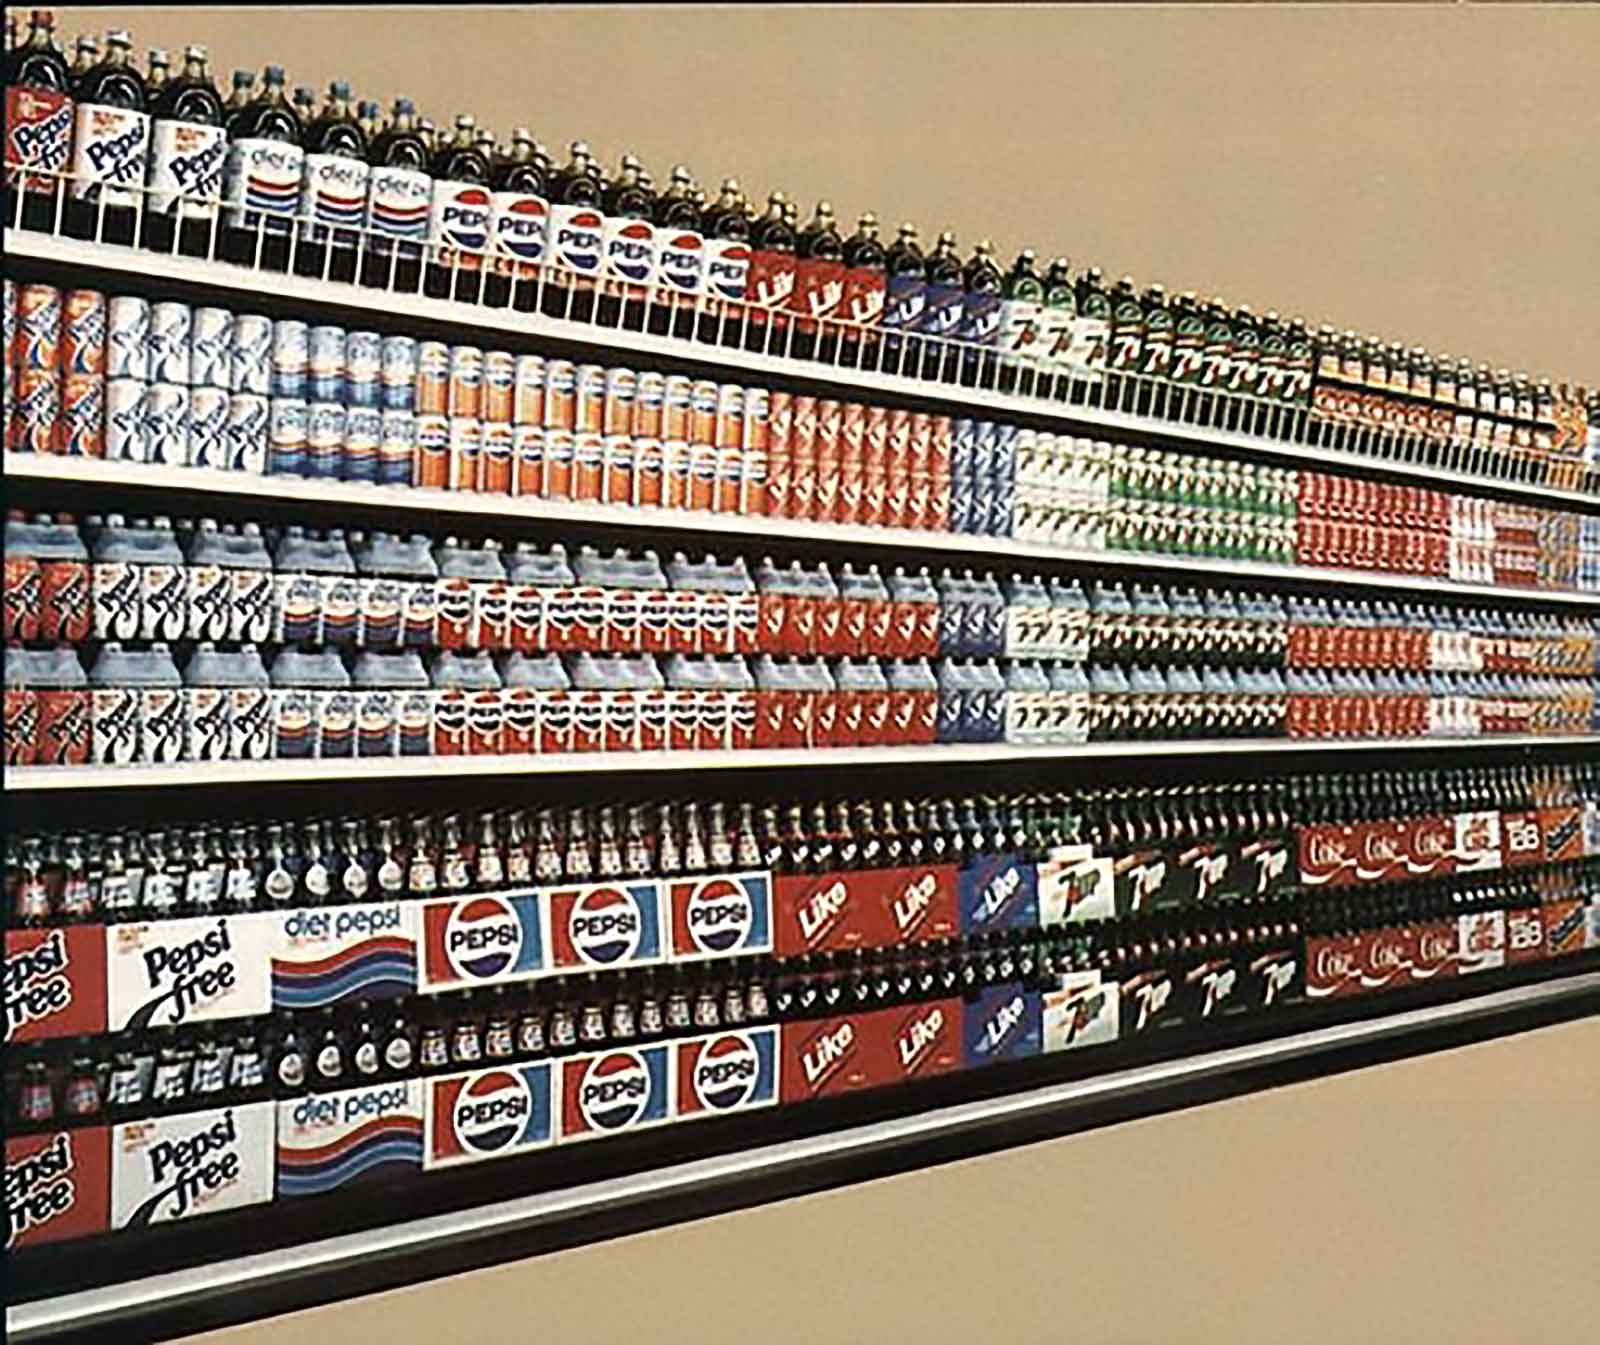 Have You Seen This? Retro Soda Display From A 1984 Grocery Store